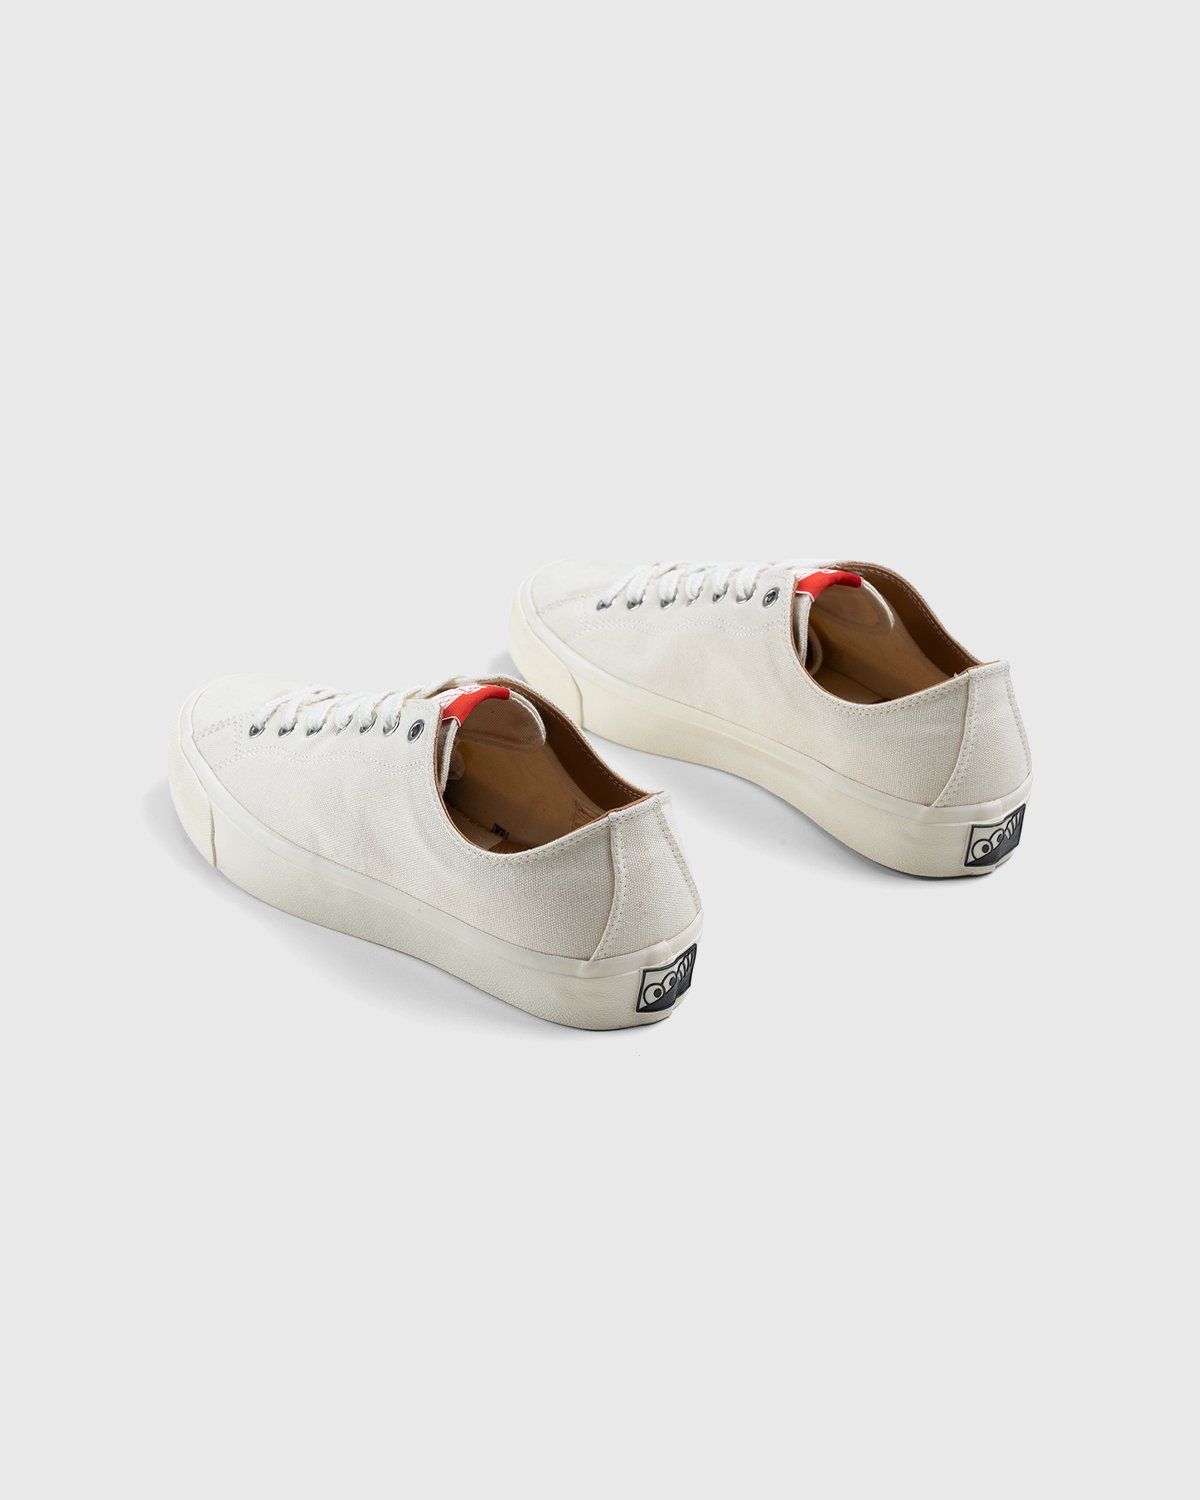 Last Resort AB – VM003 Canvas Lo White/White - Low Top Sneakers - White - Image 4